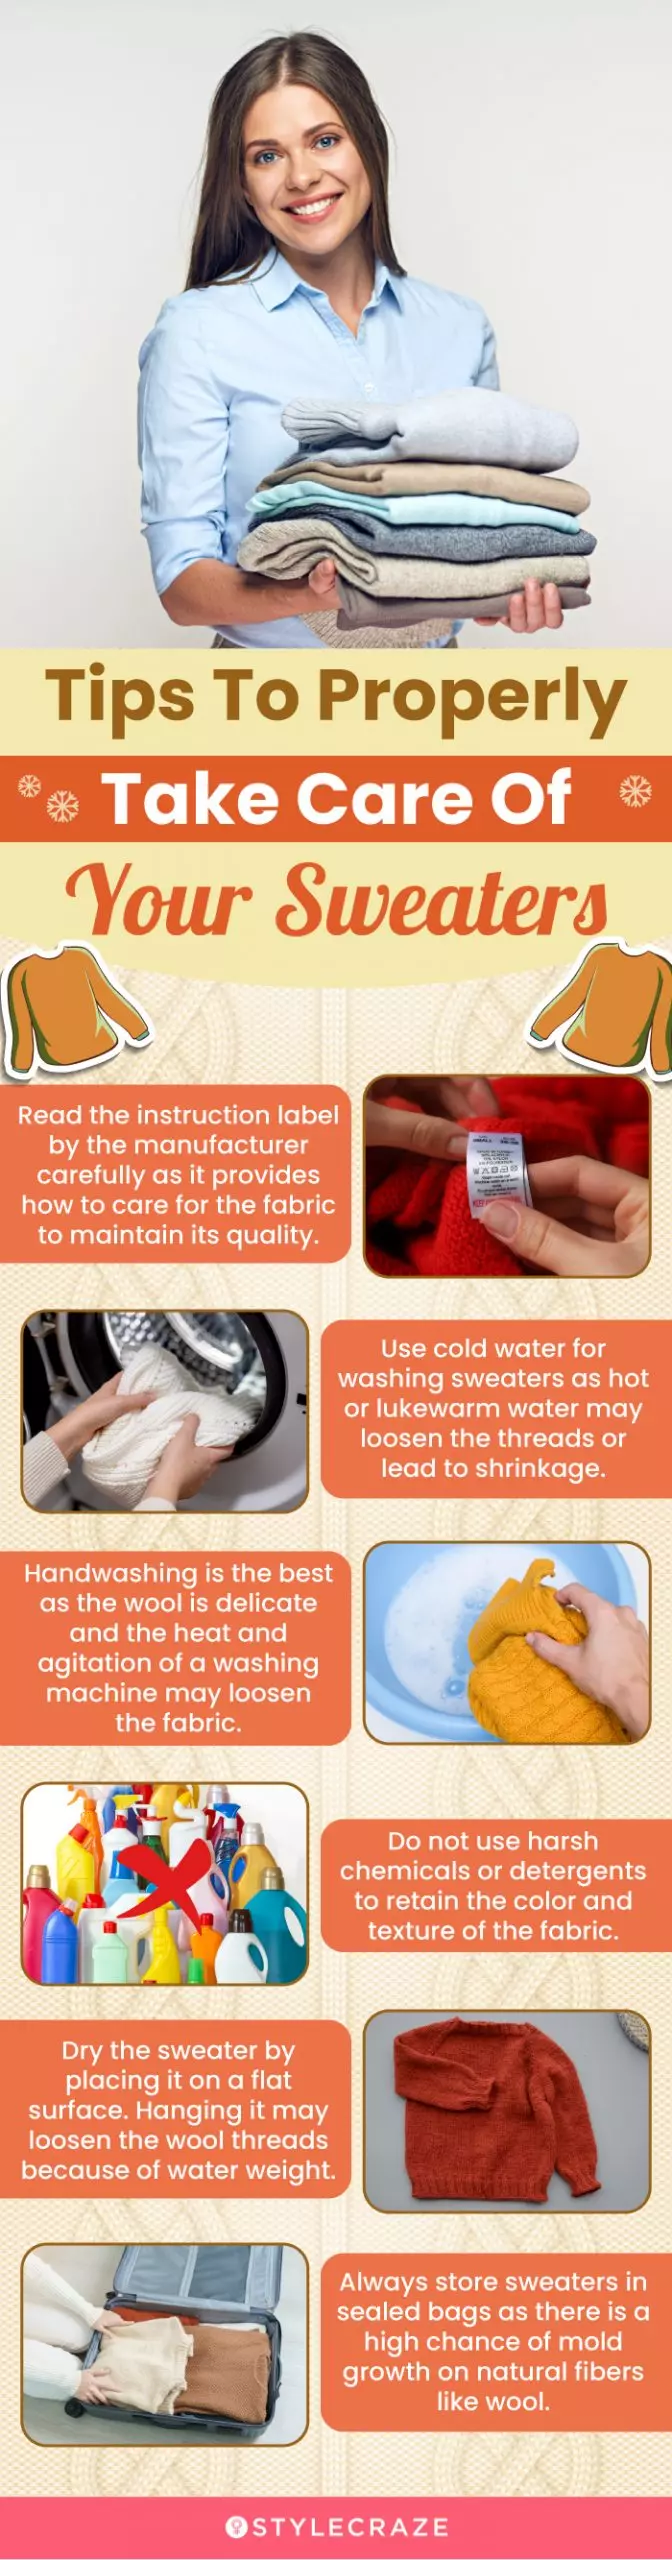 Tips To Properly Take Care Of Your Sweaters (infographic)